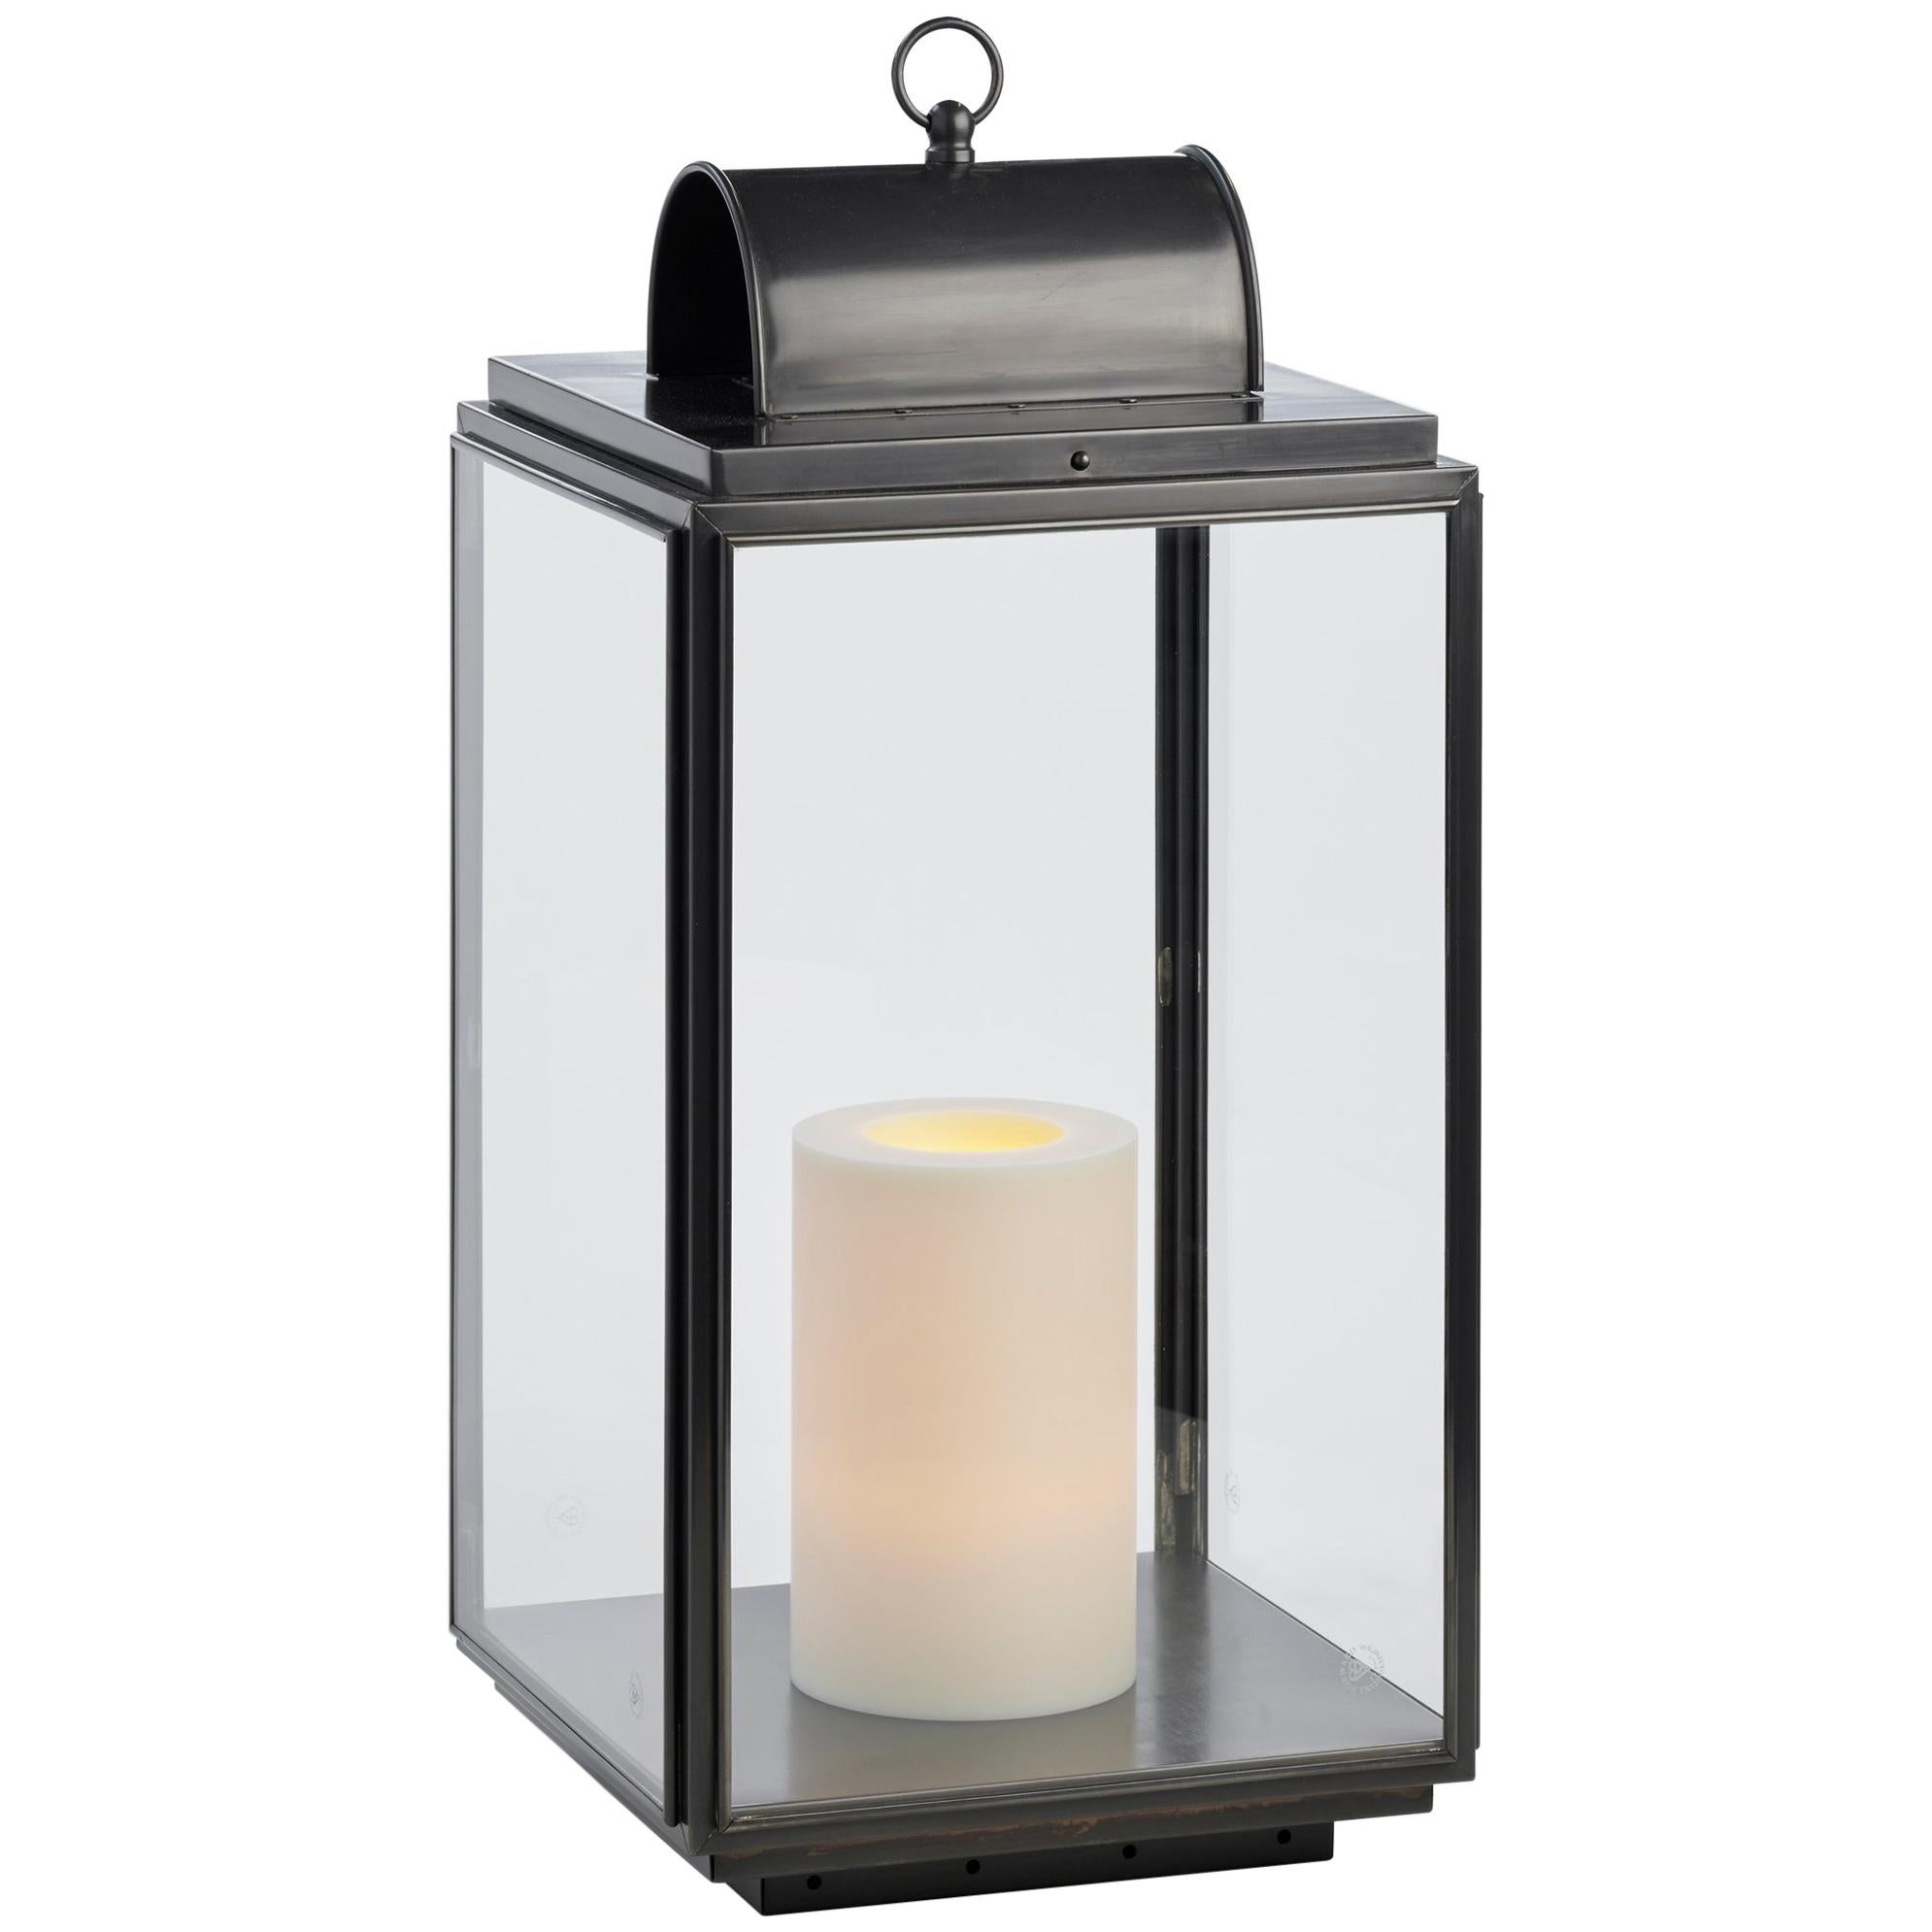 Tekna Penrose Candle Light with Dark Bronze Finish and Clear Glass